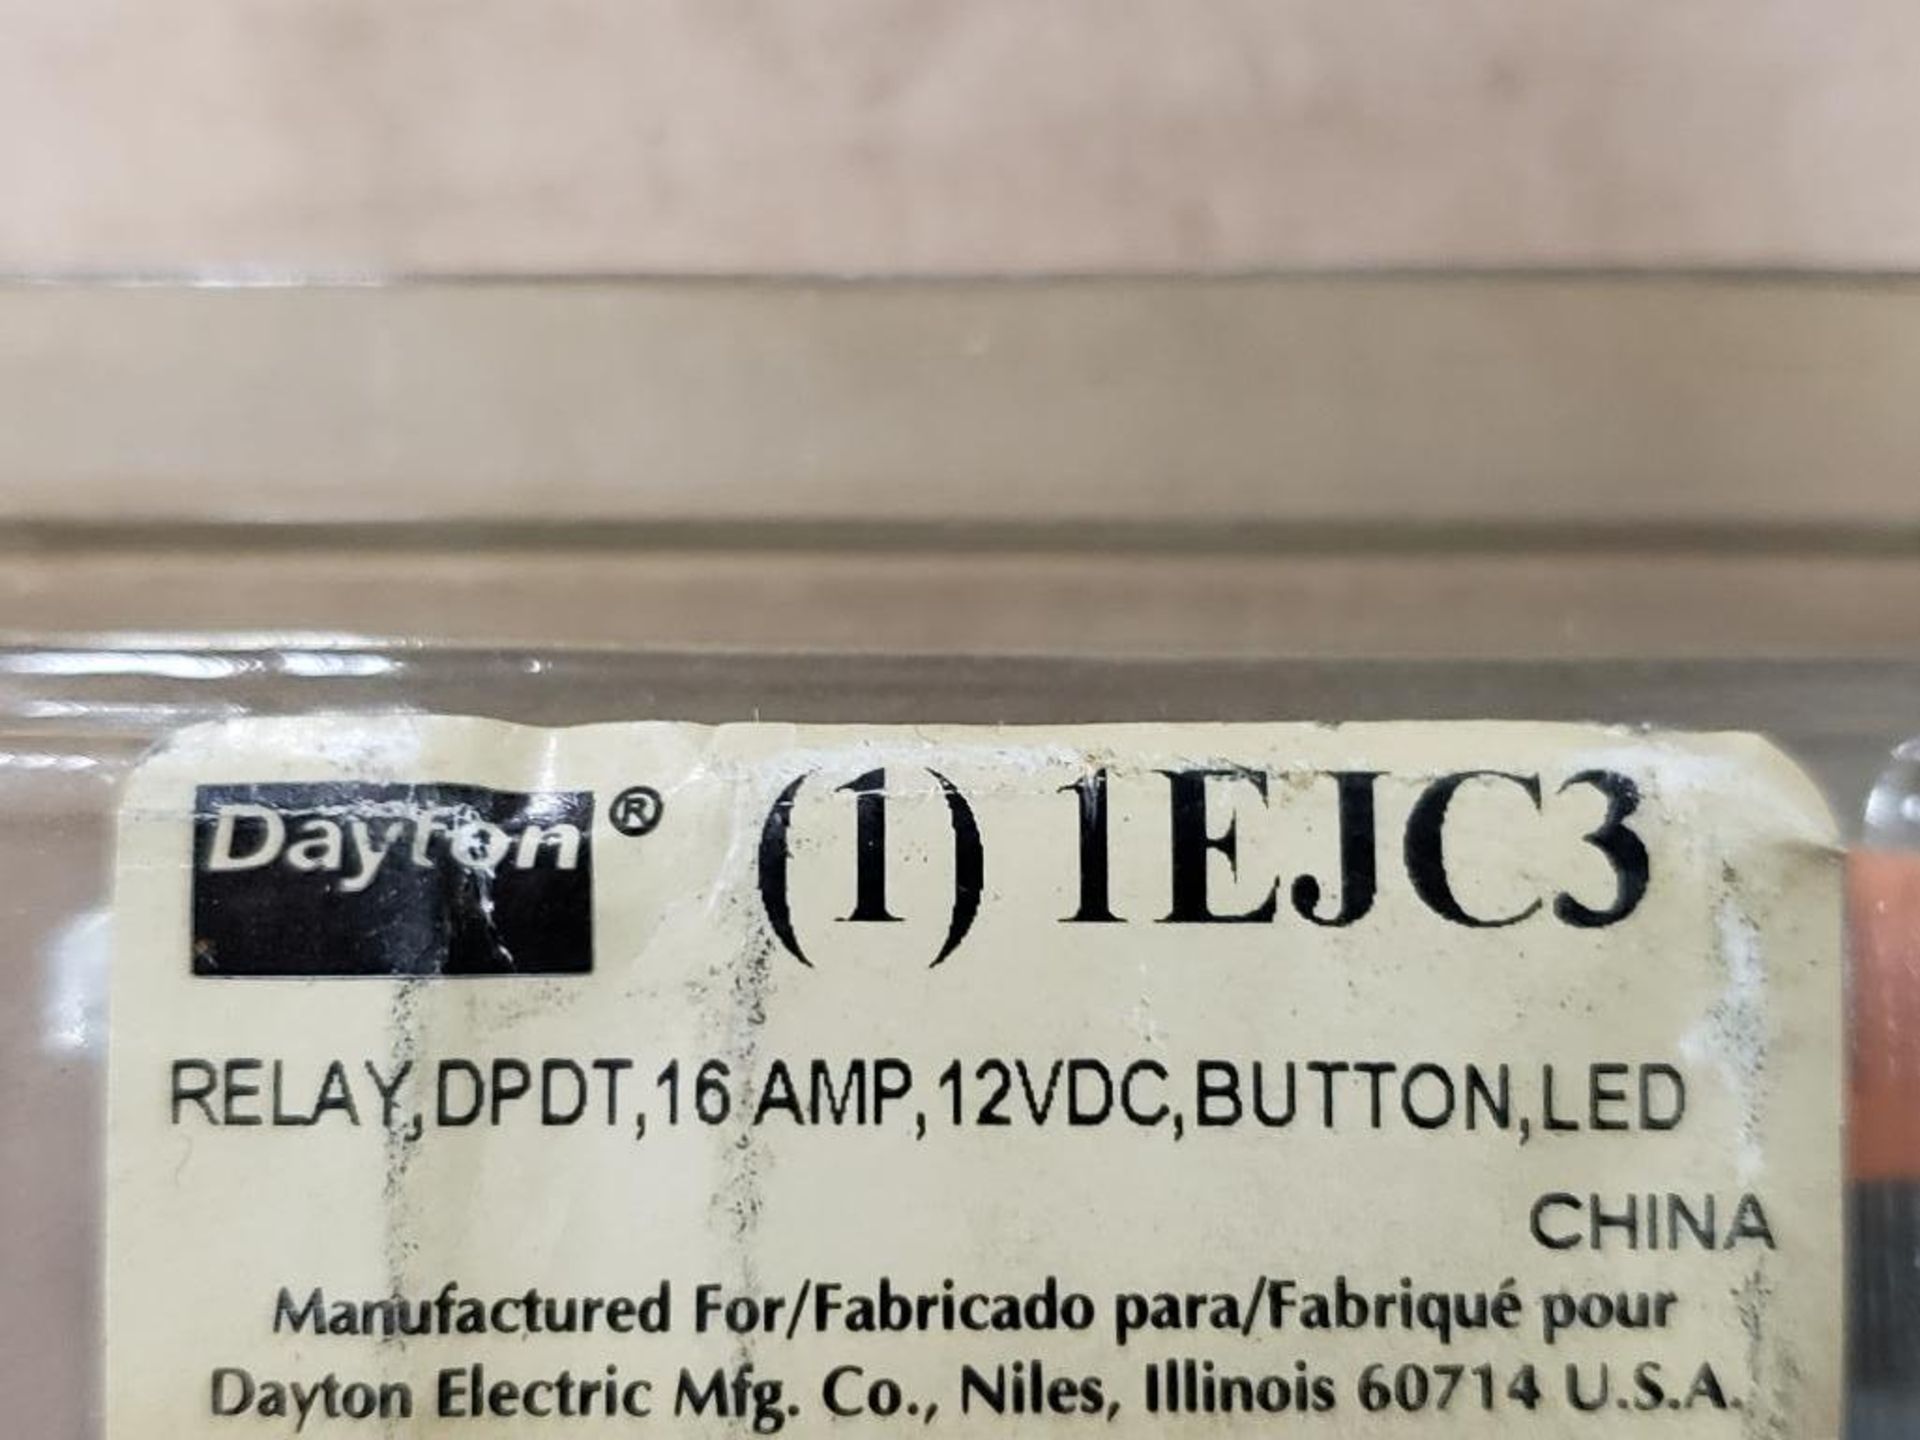 Qty 20 - Dayton 1EJC3 relay, DPDT, 16AMP, 12VDC, button, LED. New in box. - Image 2 of 2